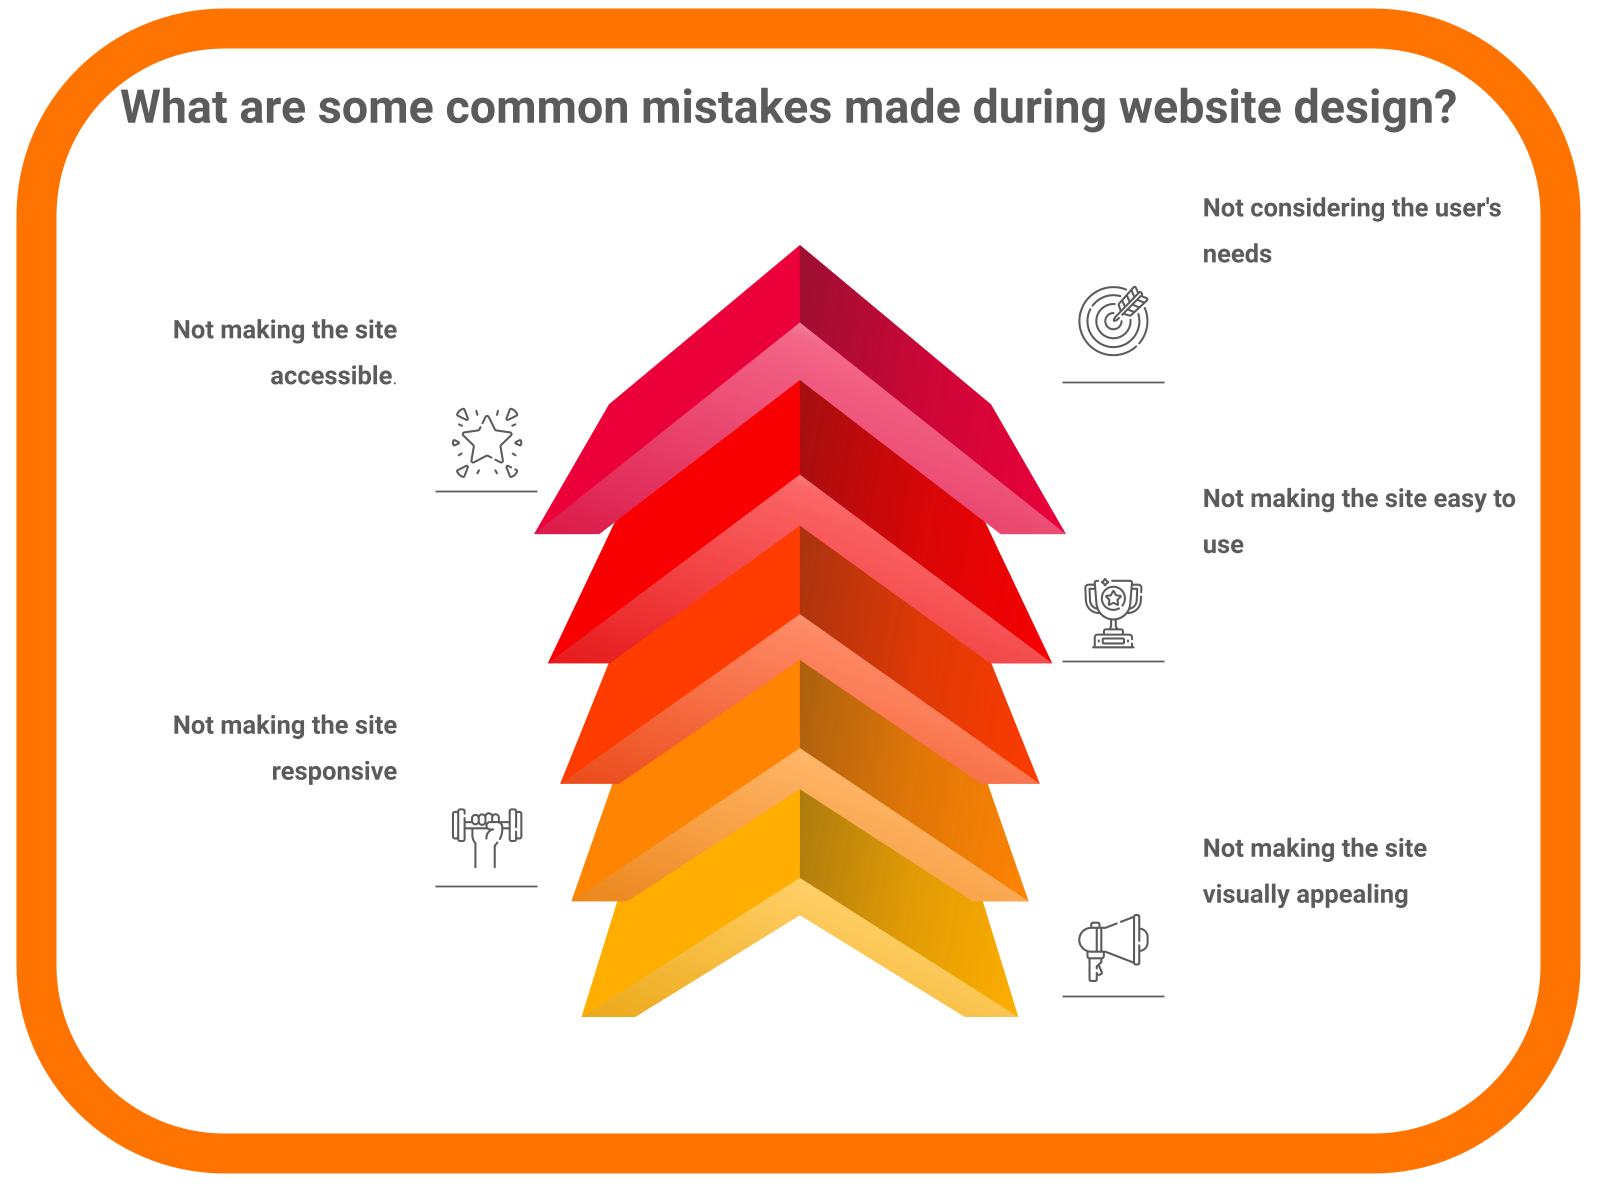 What are some common mistakes made during website design?